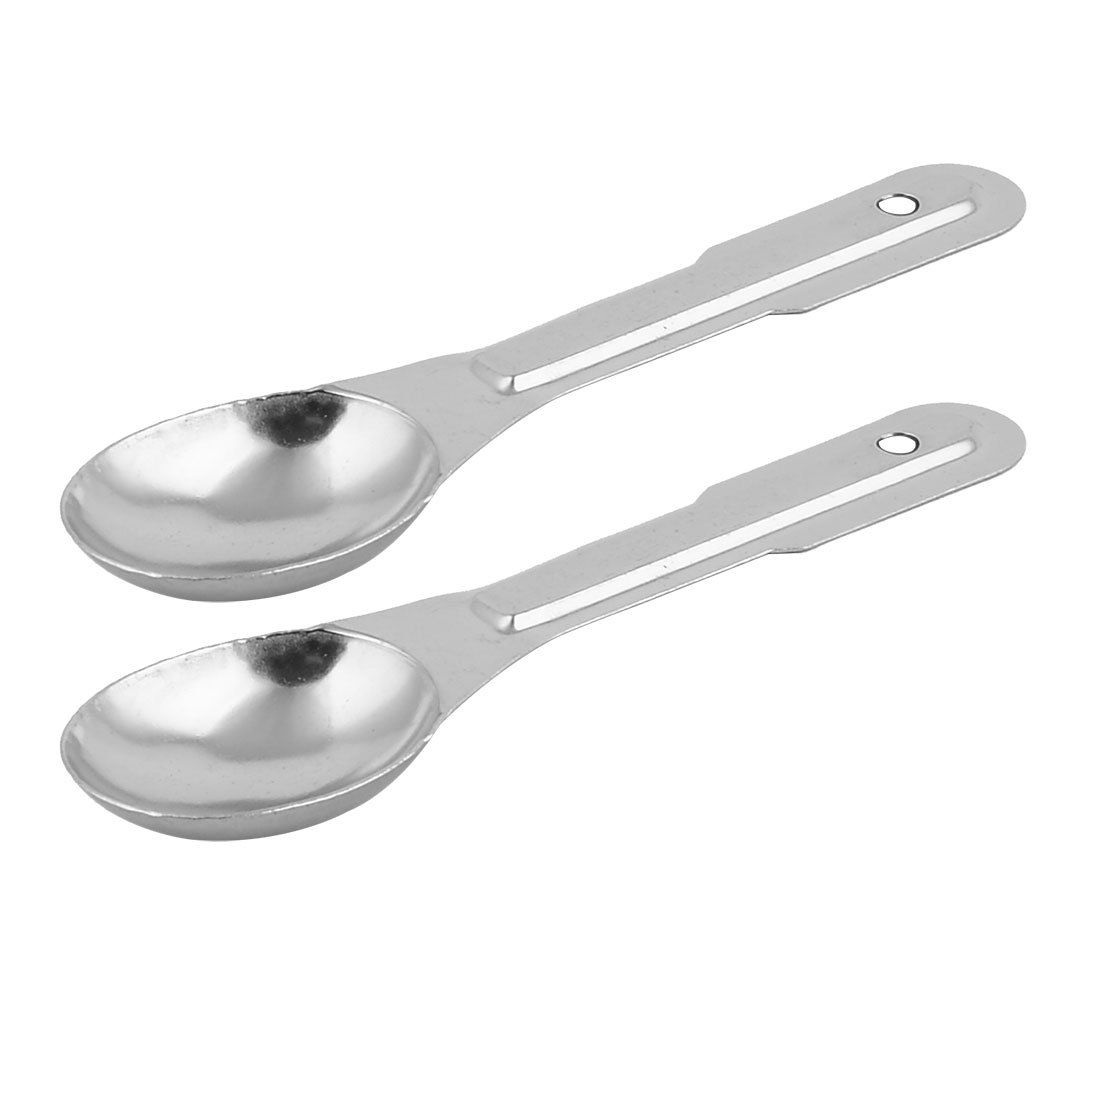 6oz Stainless Steel Scoop for Ice Bucket, Small Silver Metal Scoop for  Flour, Kitchen, Bar, Candy, 9.2 x 3.3 inches